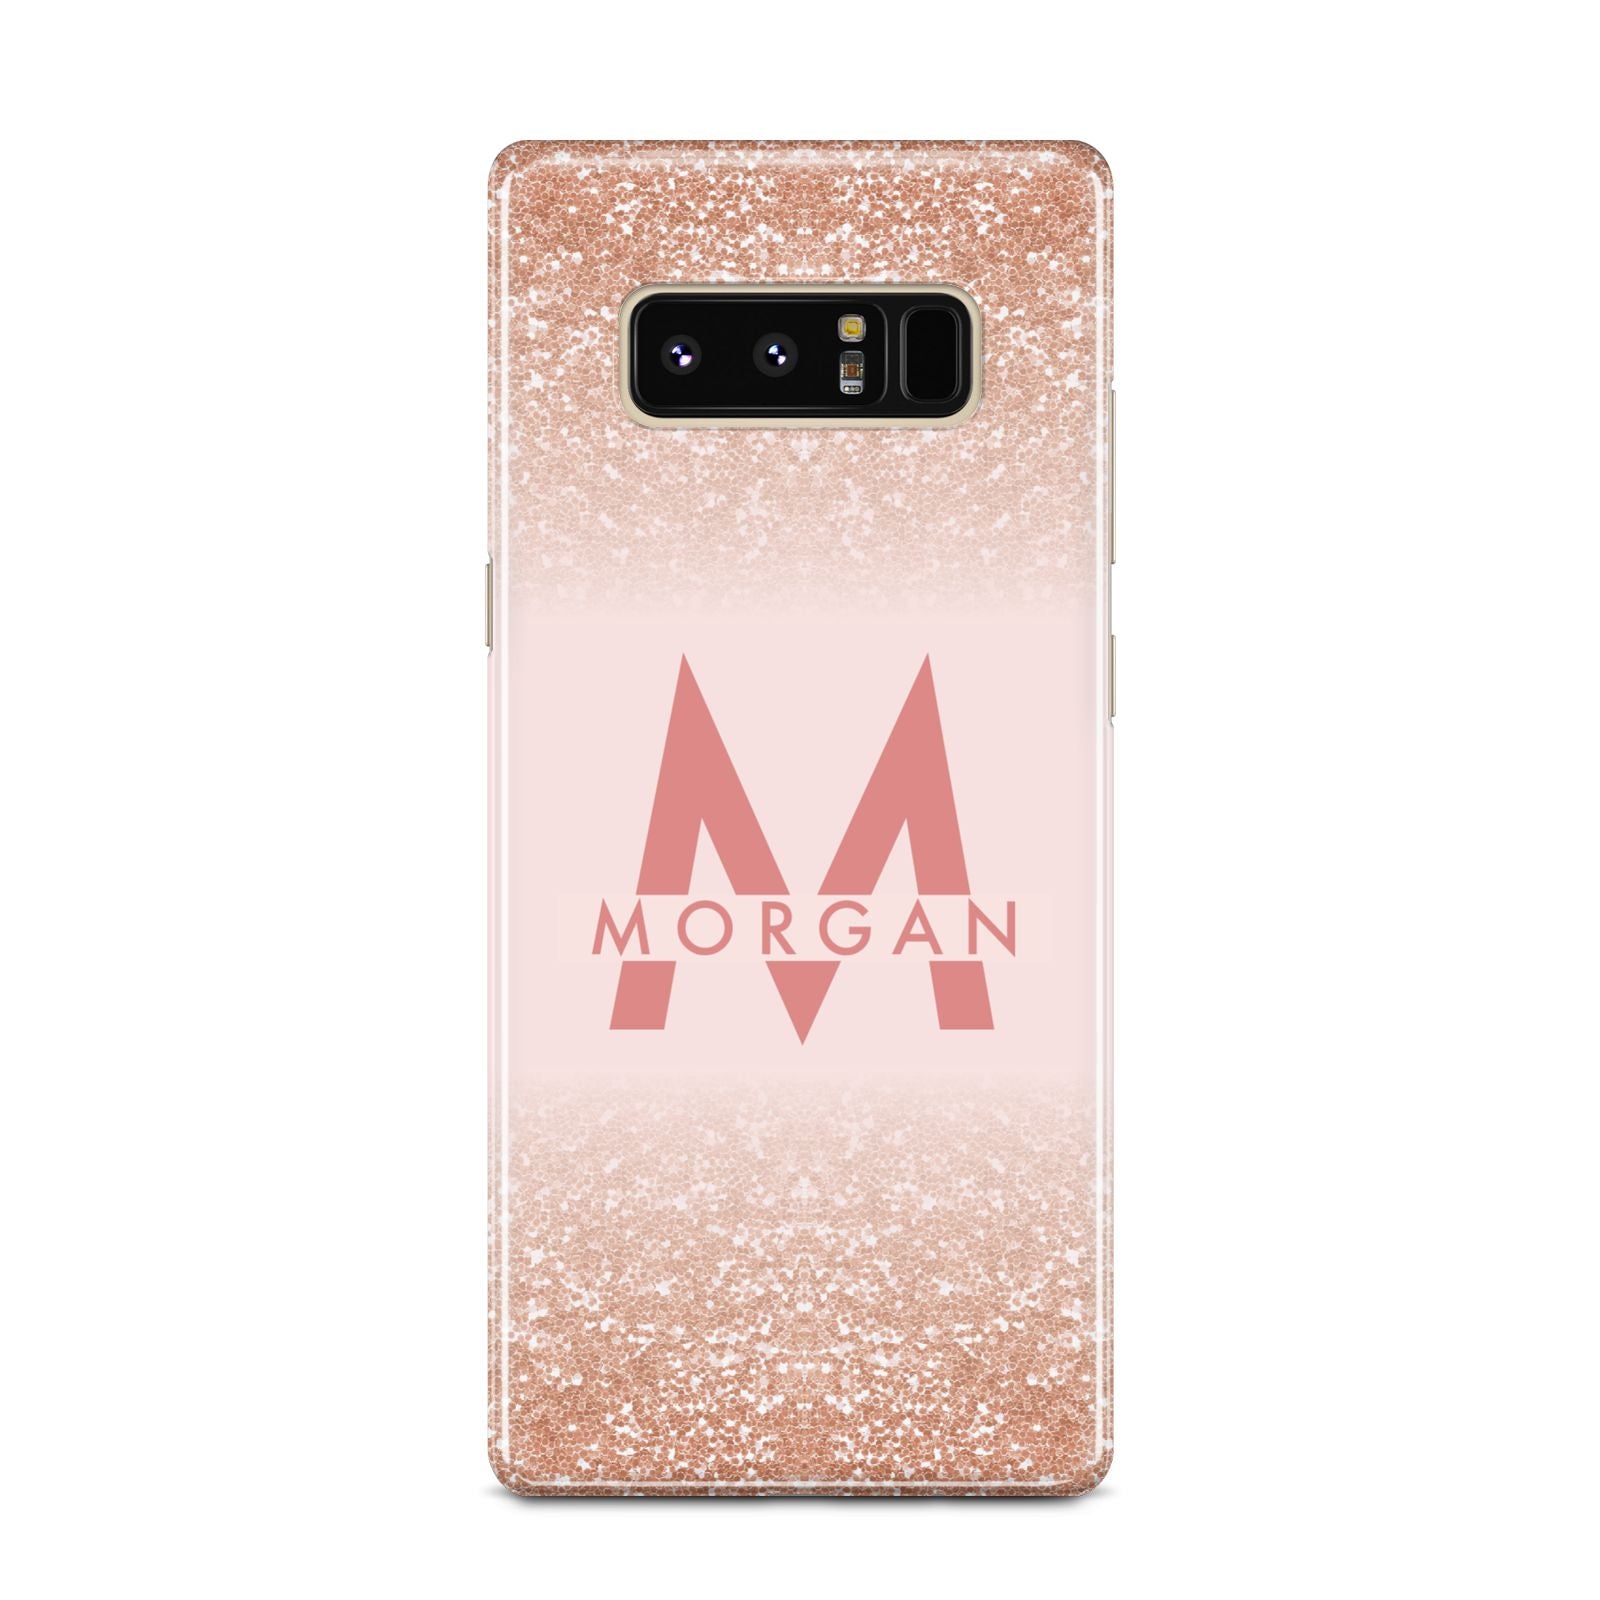 Personalised Printed Glitter Name Initials Samsung Galaxy Note 8 Case